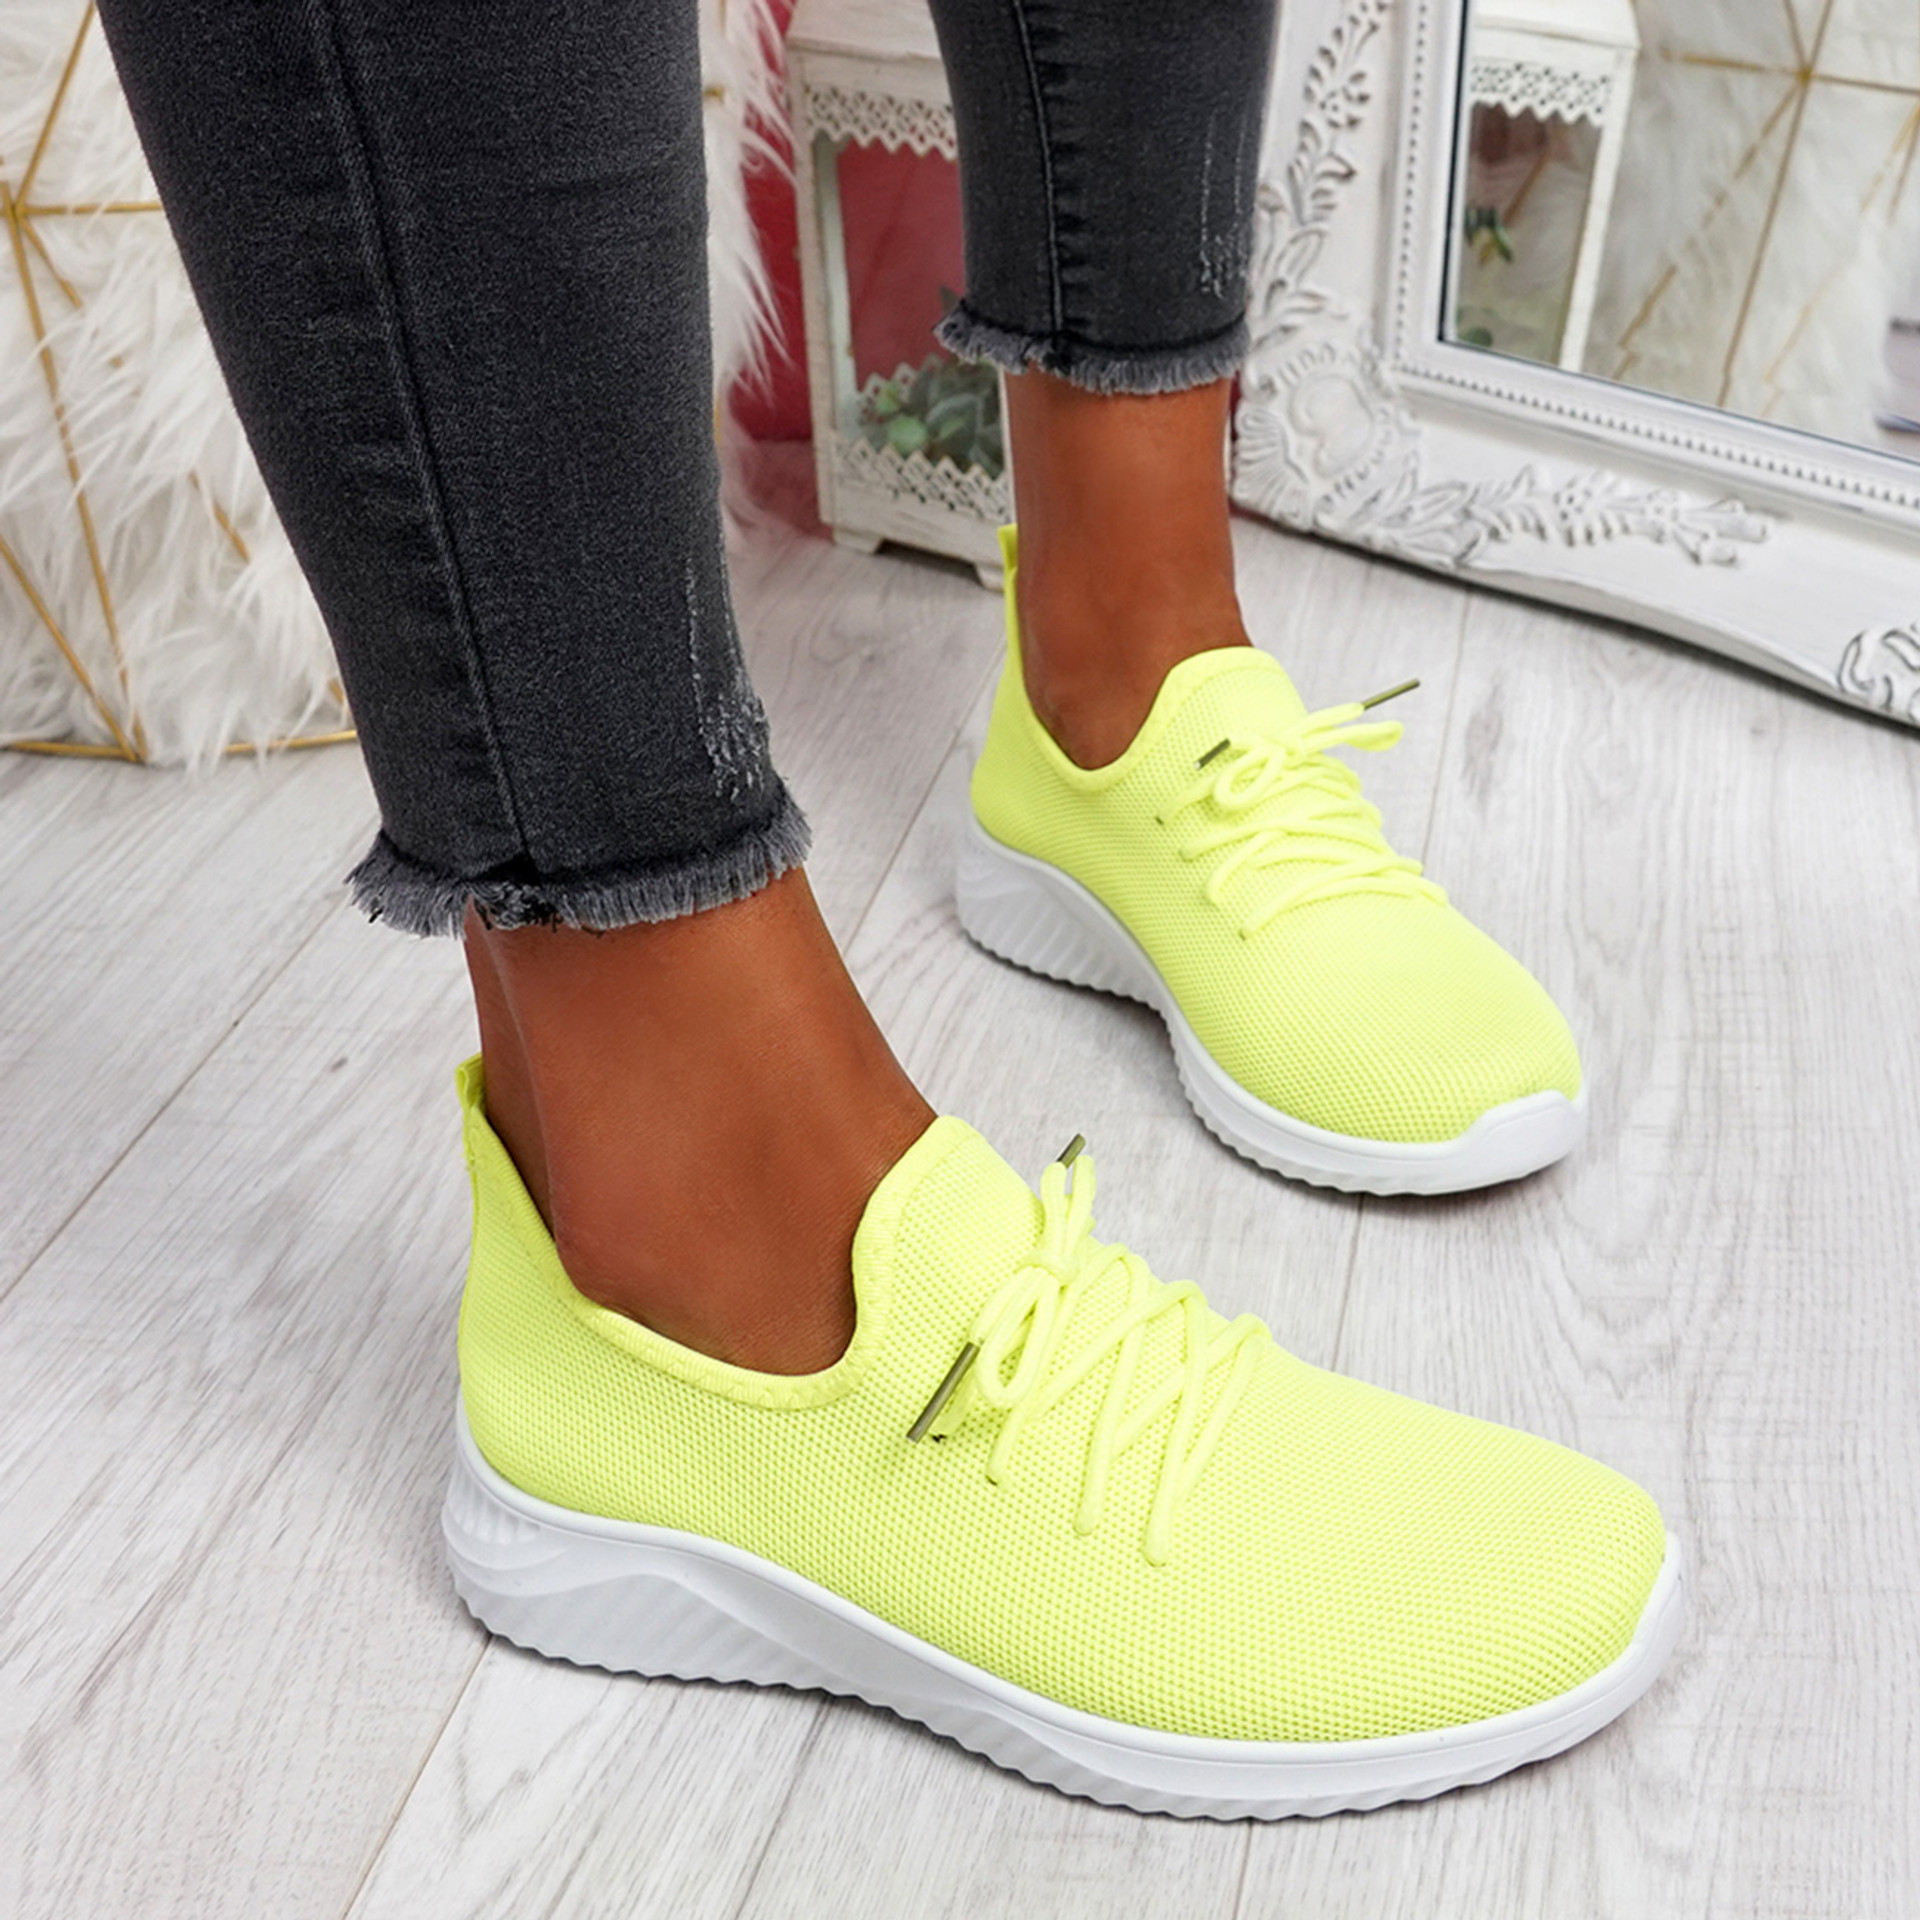 Loky Fluorescent Running Trainers